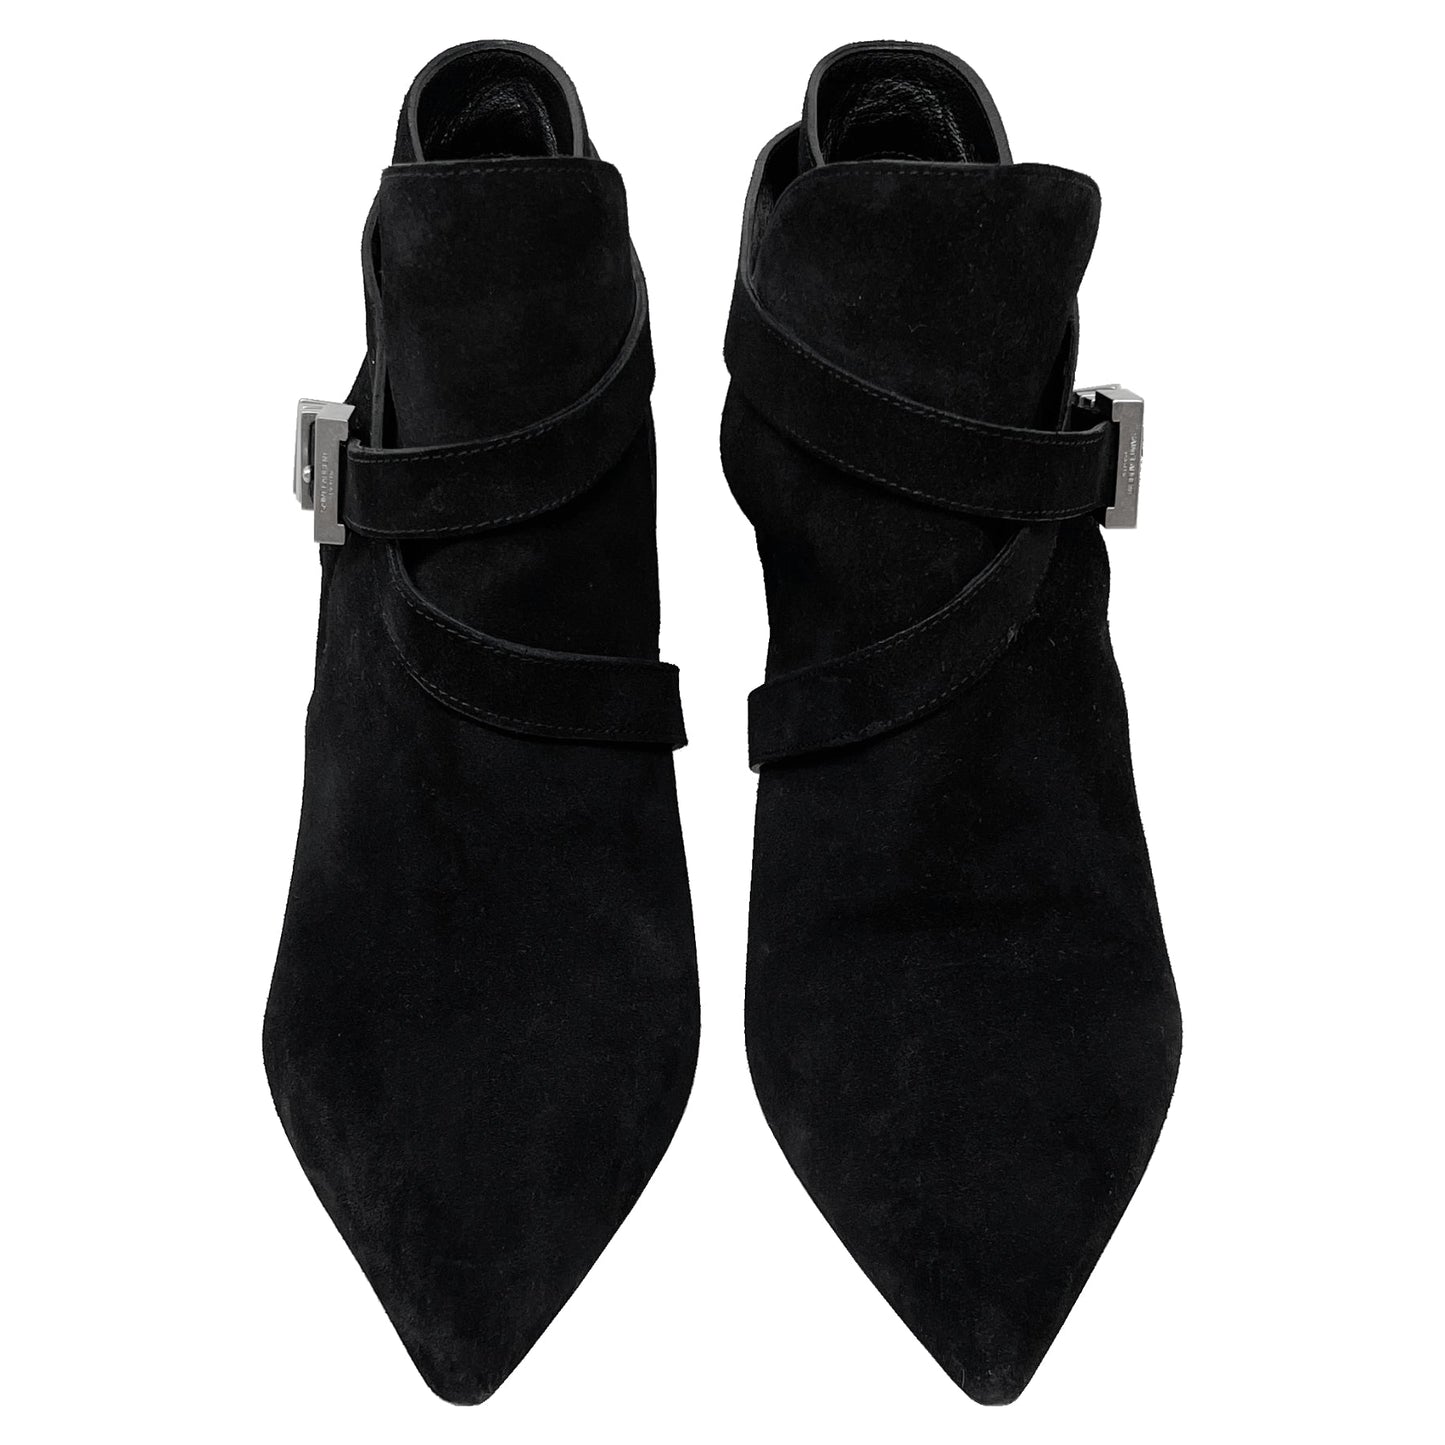 Saint Laurent Suede Pointed Buckle Toe Ankle Boots